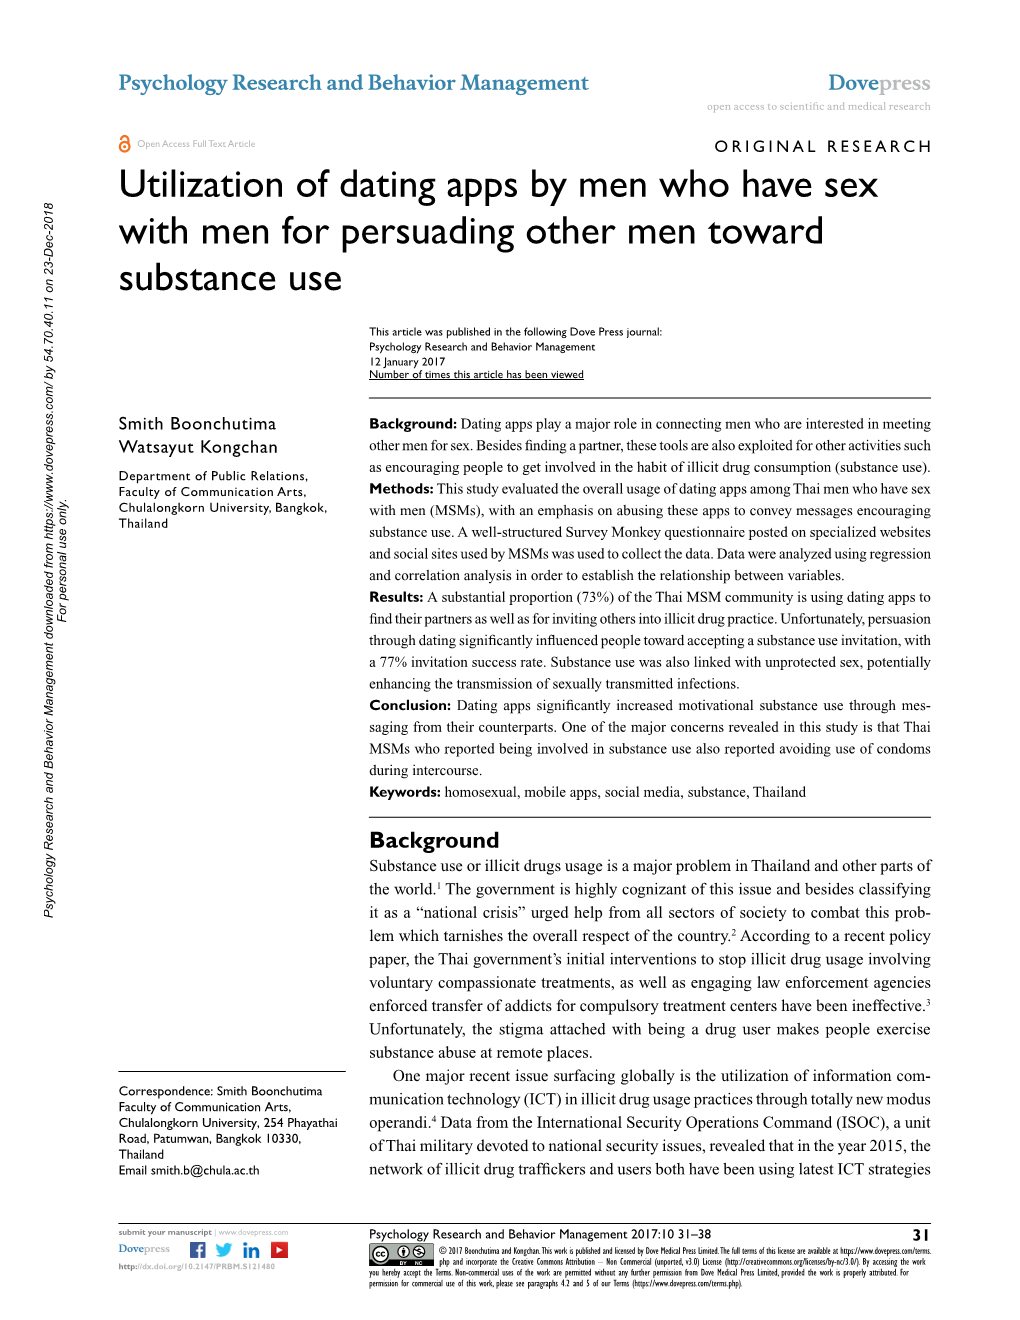 Utilization of Dating Apps by Men Who Have Sex with Men for Persuading Other Men Toward Substance Use